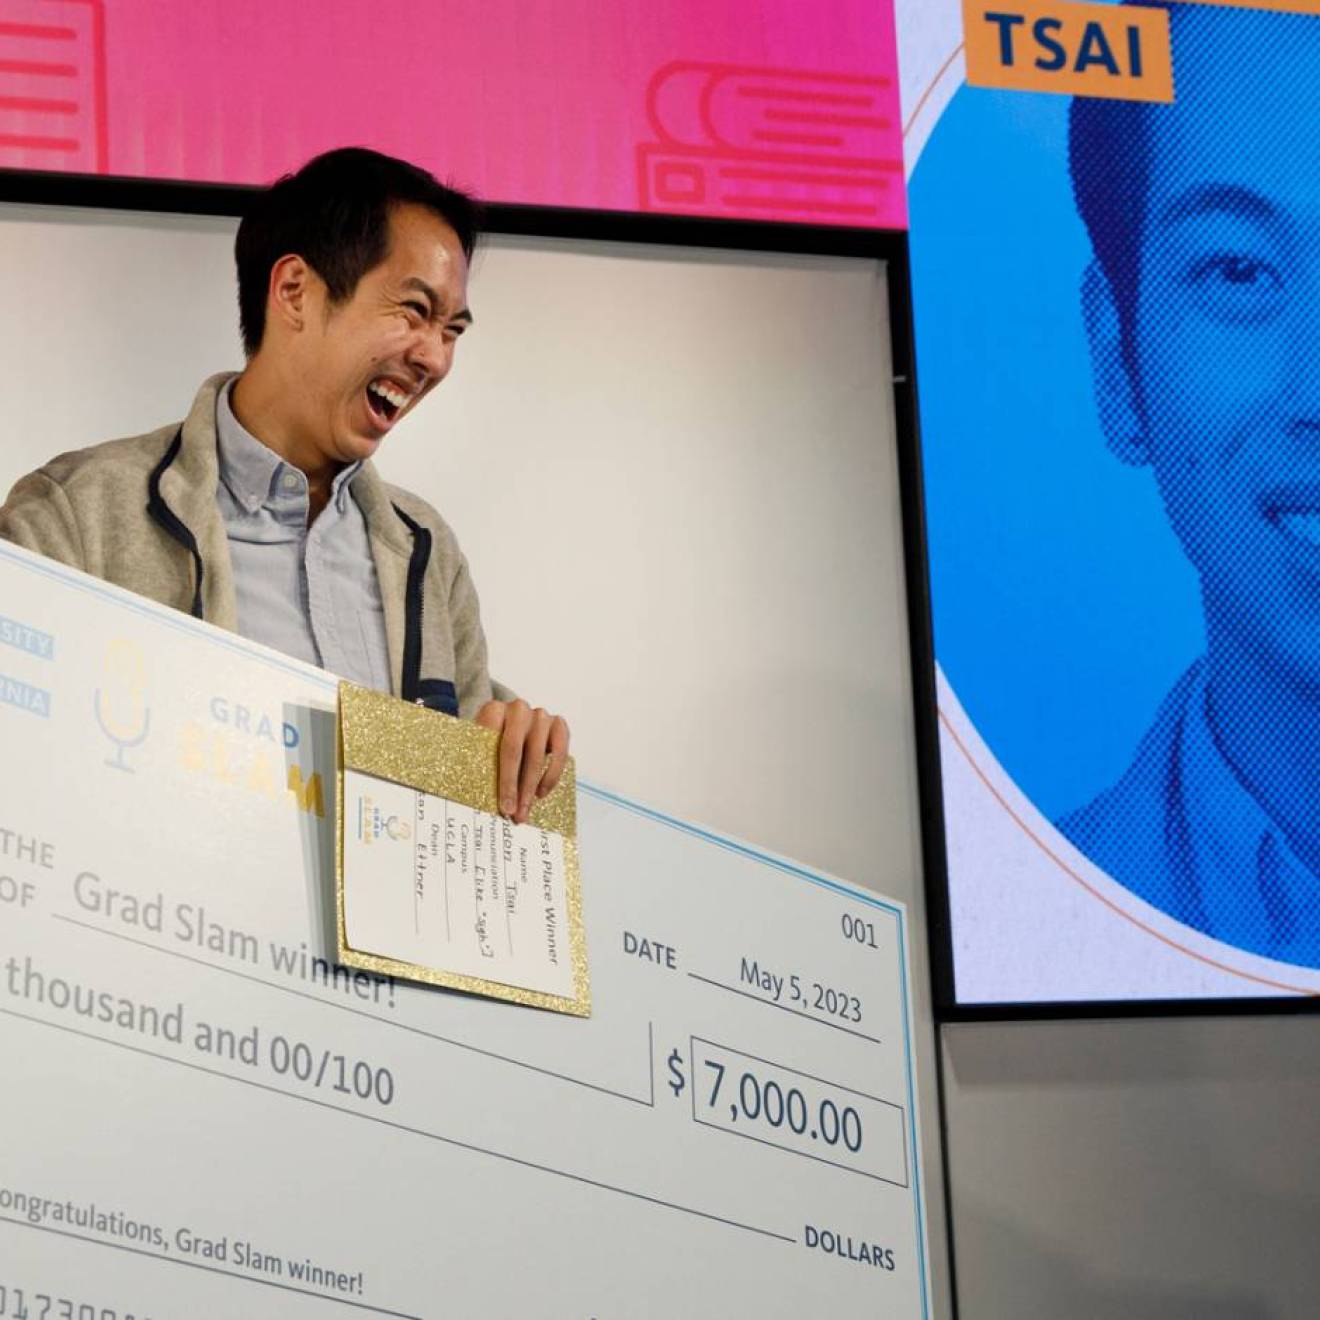 A man smiles while holding a trophy and a giant check for $7,000